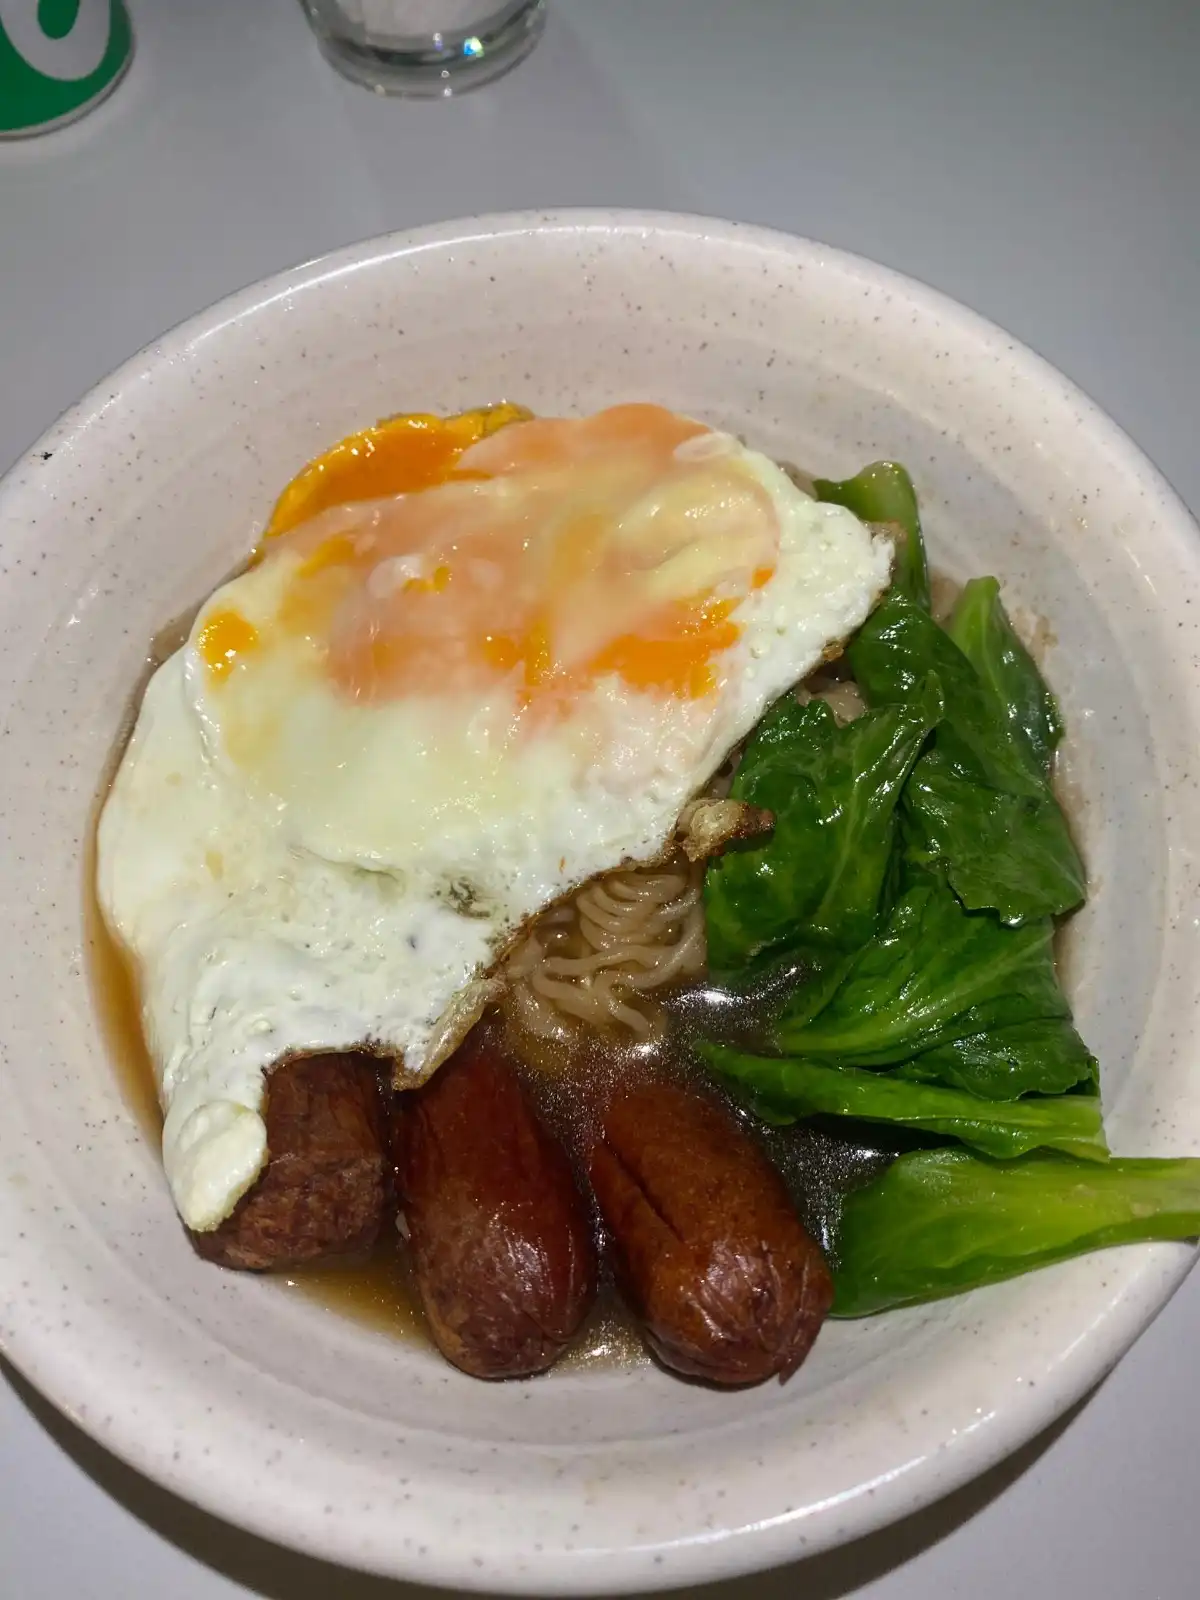 Bowl of noodle soup with fried egg, sausages, and bok choy.